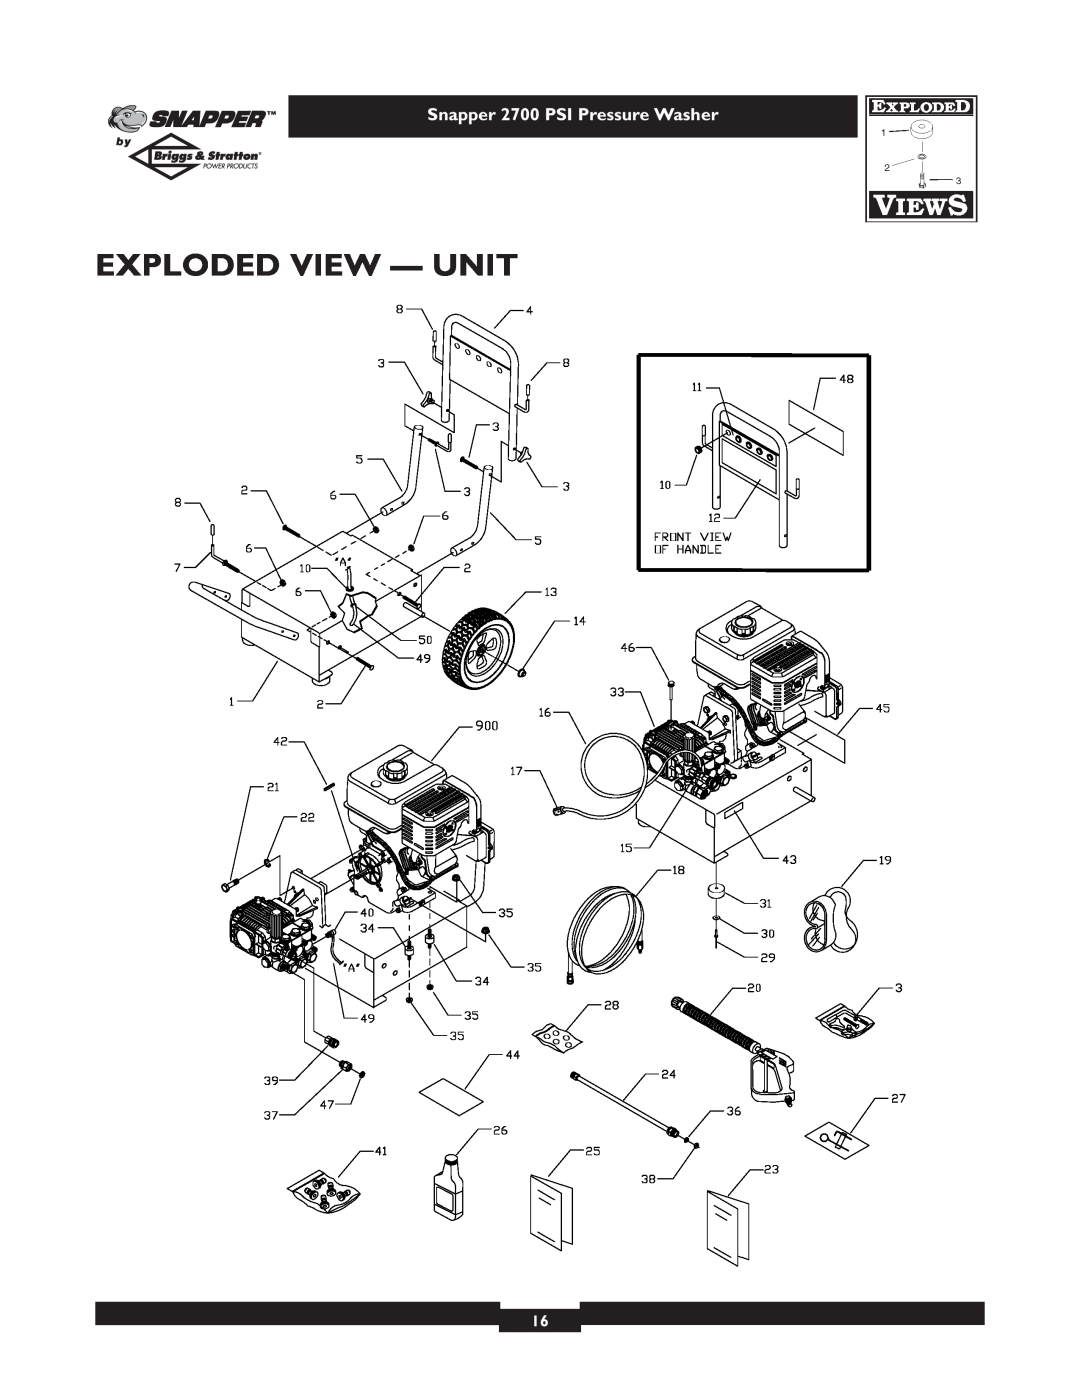 Briggs & Stratton 2700PSI owner manual Exploded View - Unit, Snapper 2700 PSI Pressure Washer 